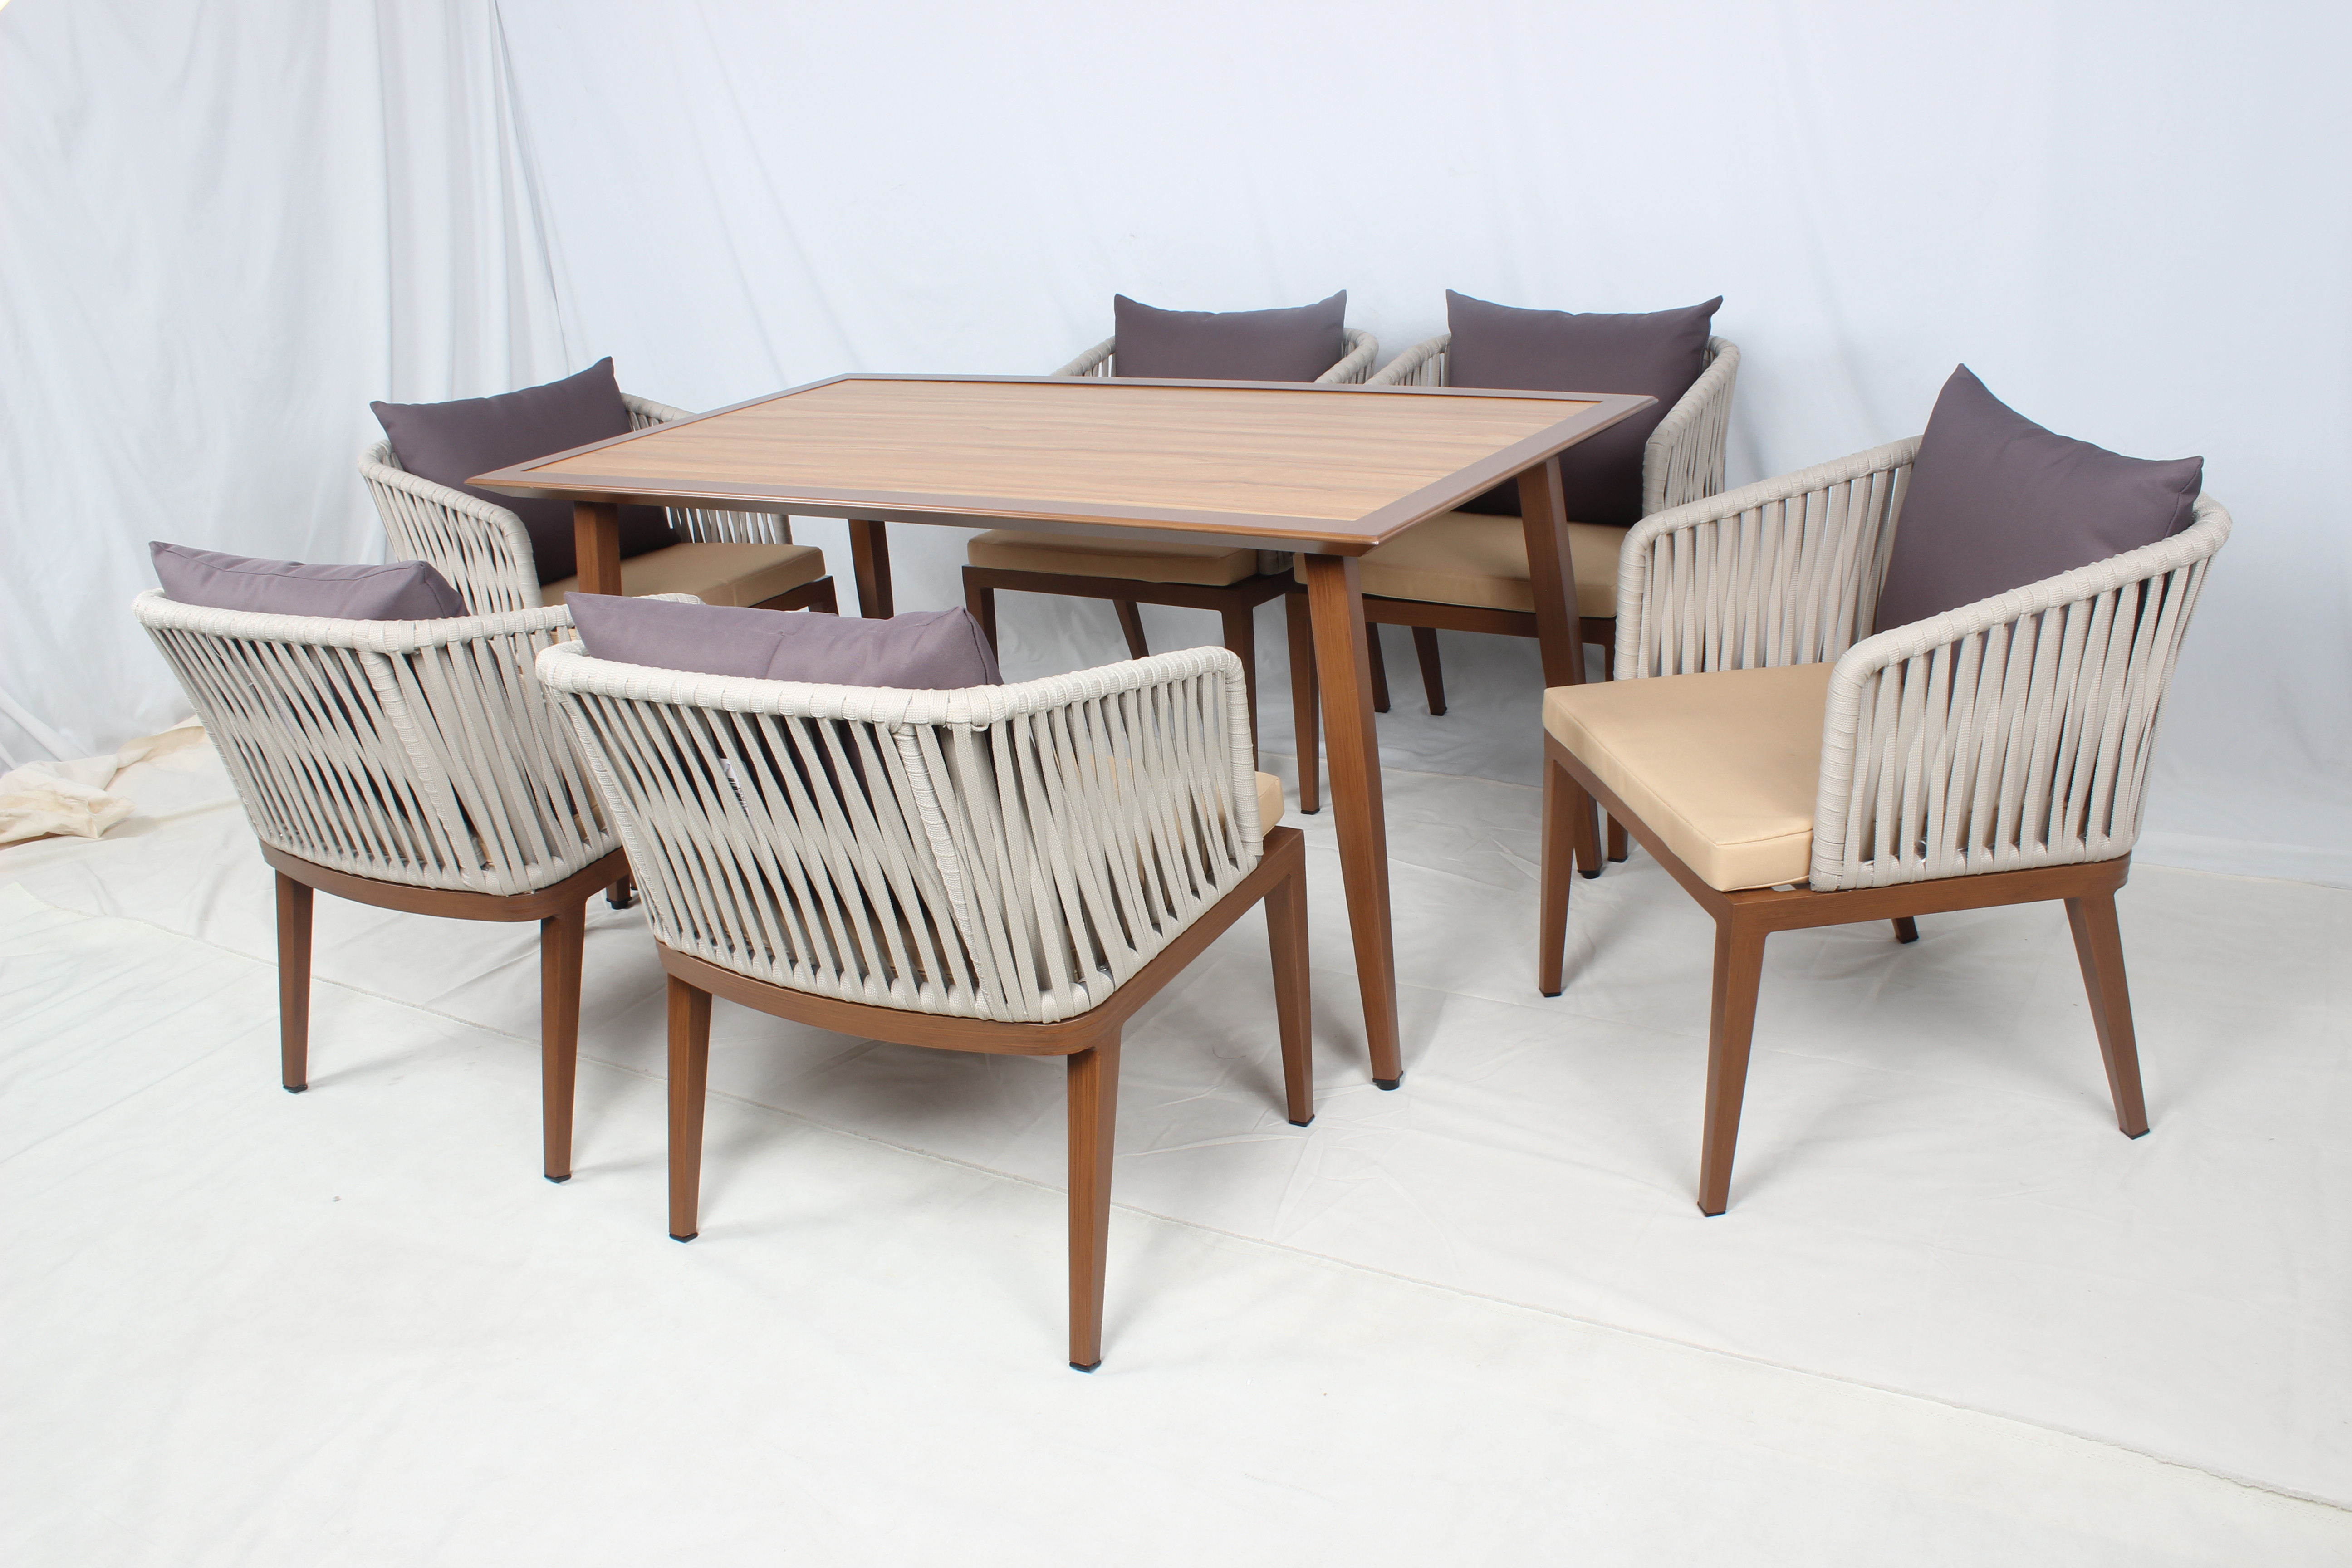 7 PCS outdoor garden dining table and chairs